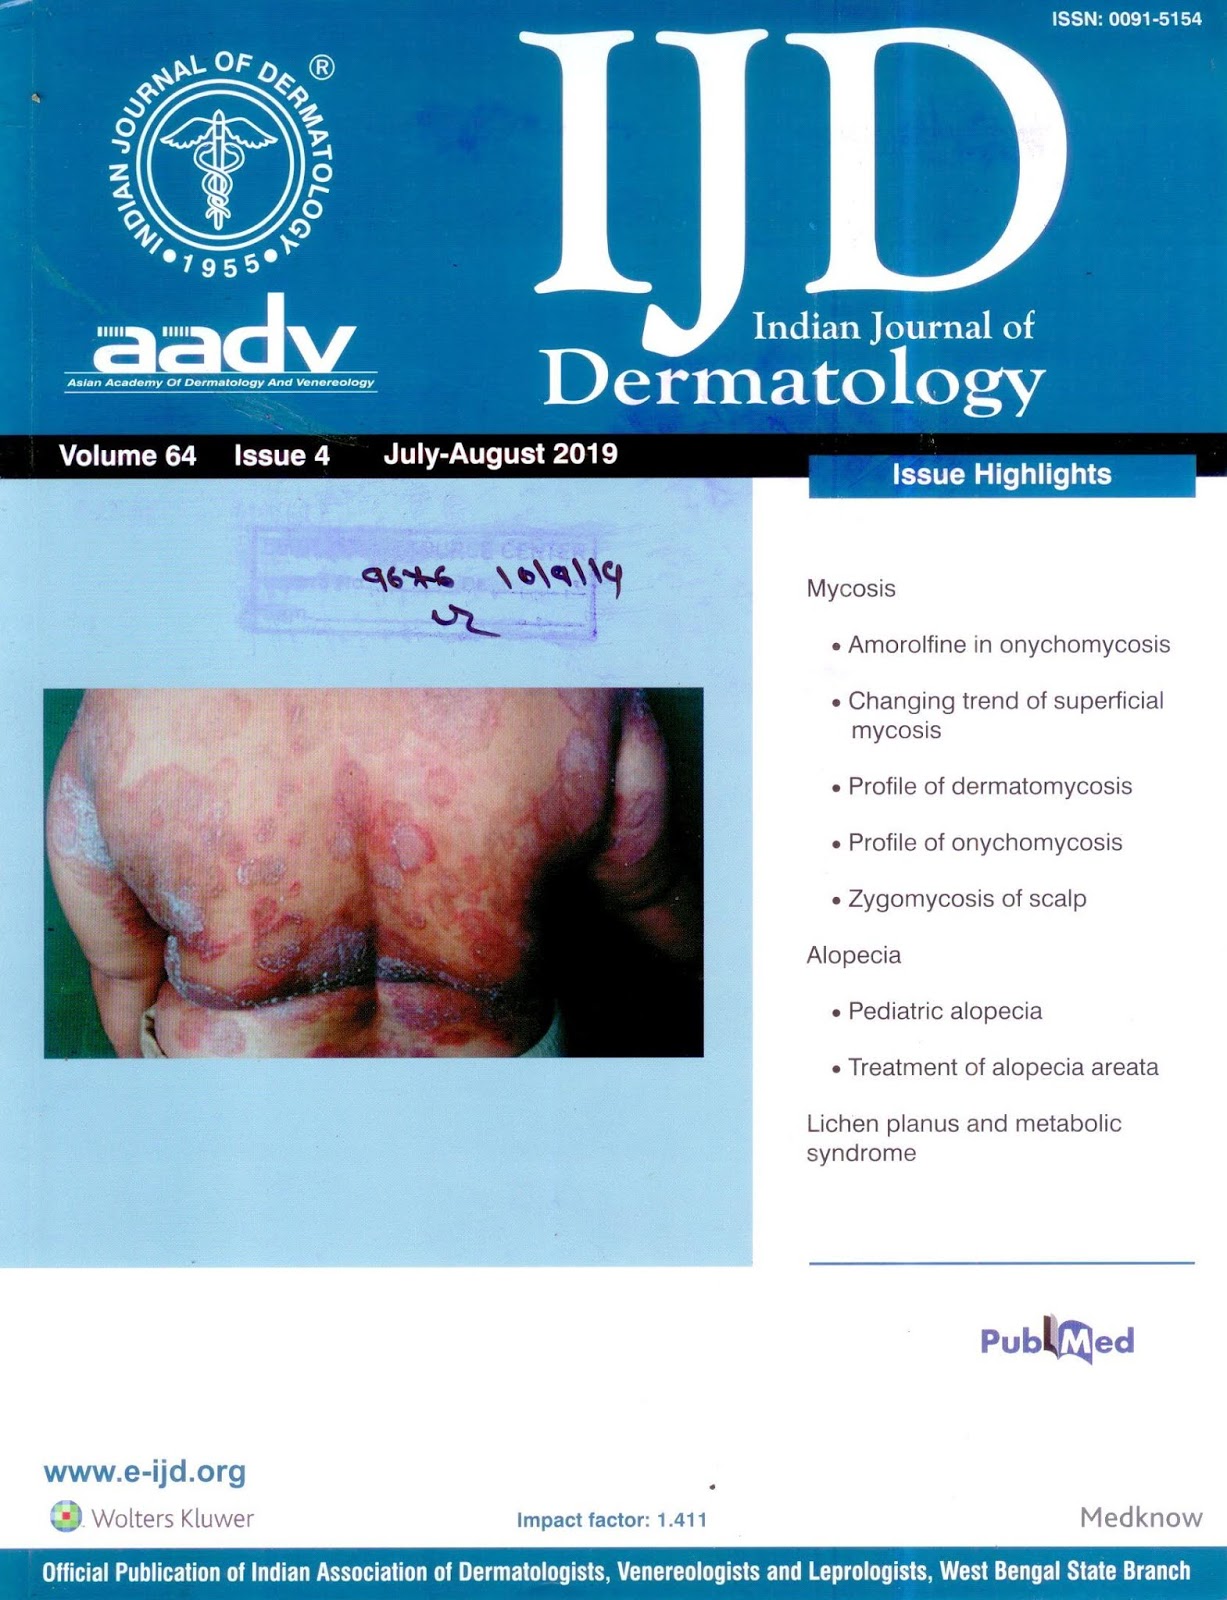 http://www.e-ijd.org/showBackIssue.asp?issn=0019-5154;year=2019;volume=64;issue=4;month=July-August